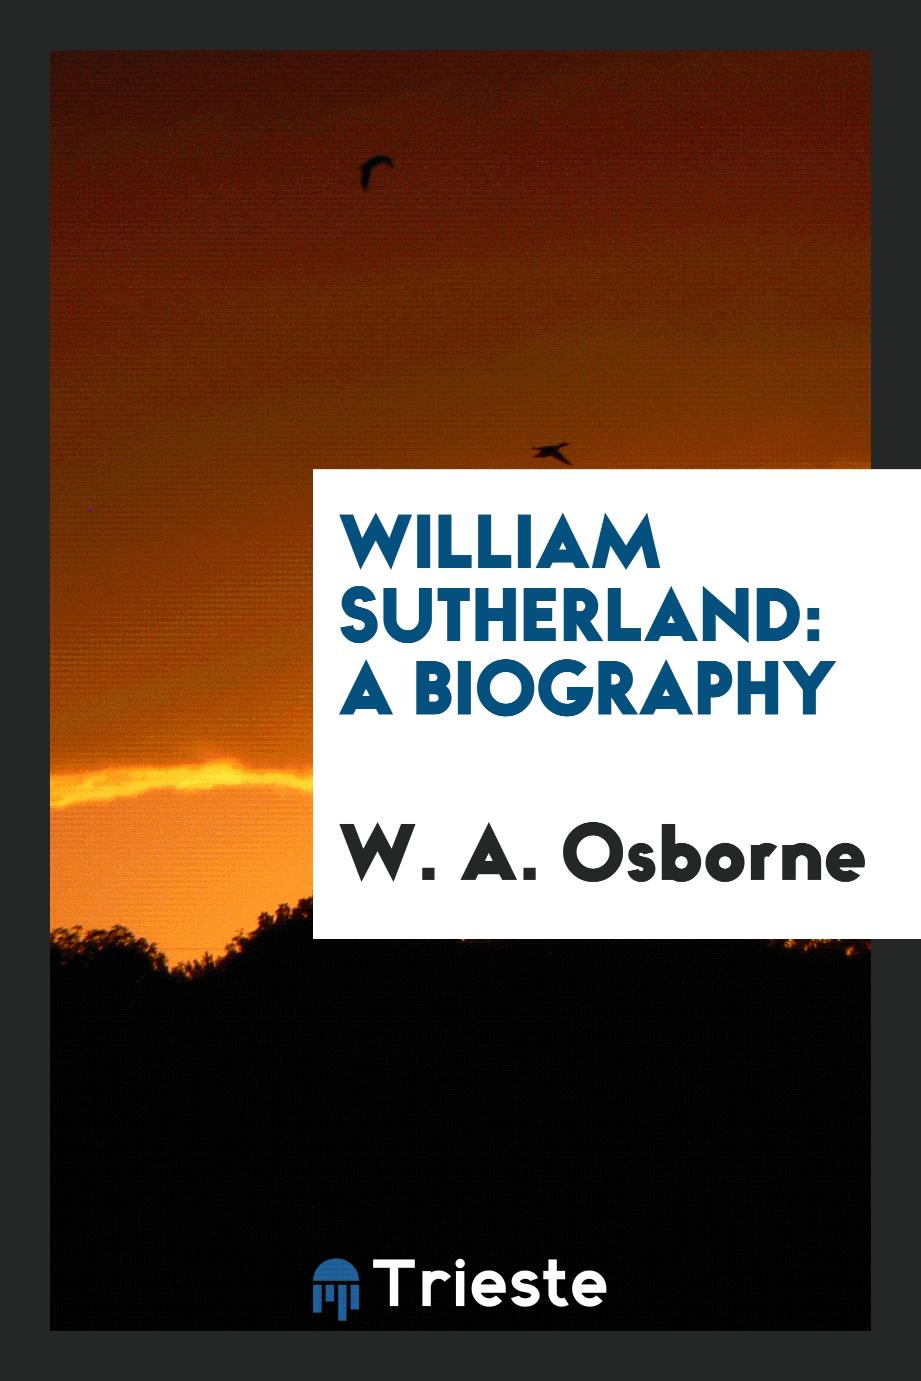 William Sutherland: A Biography